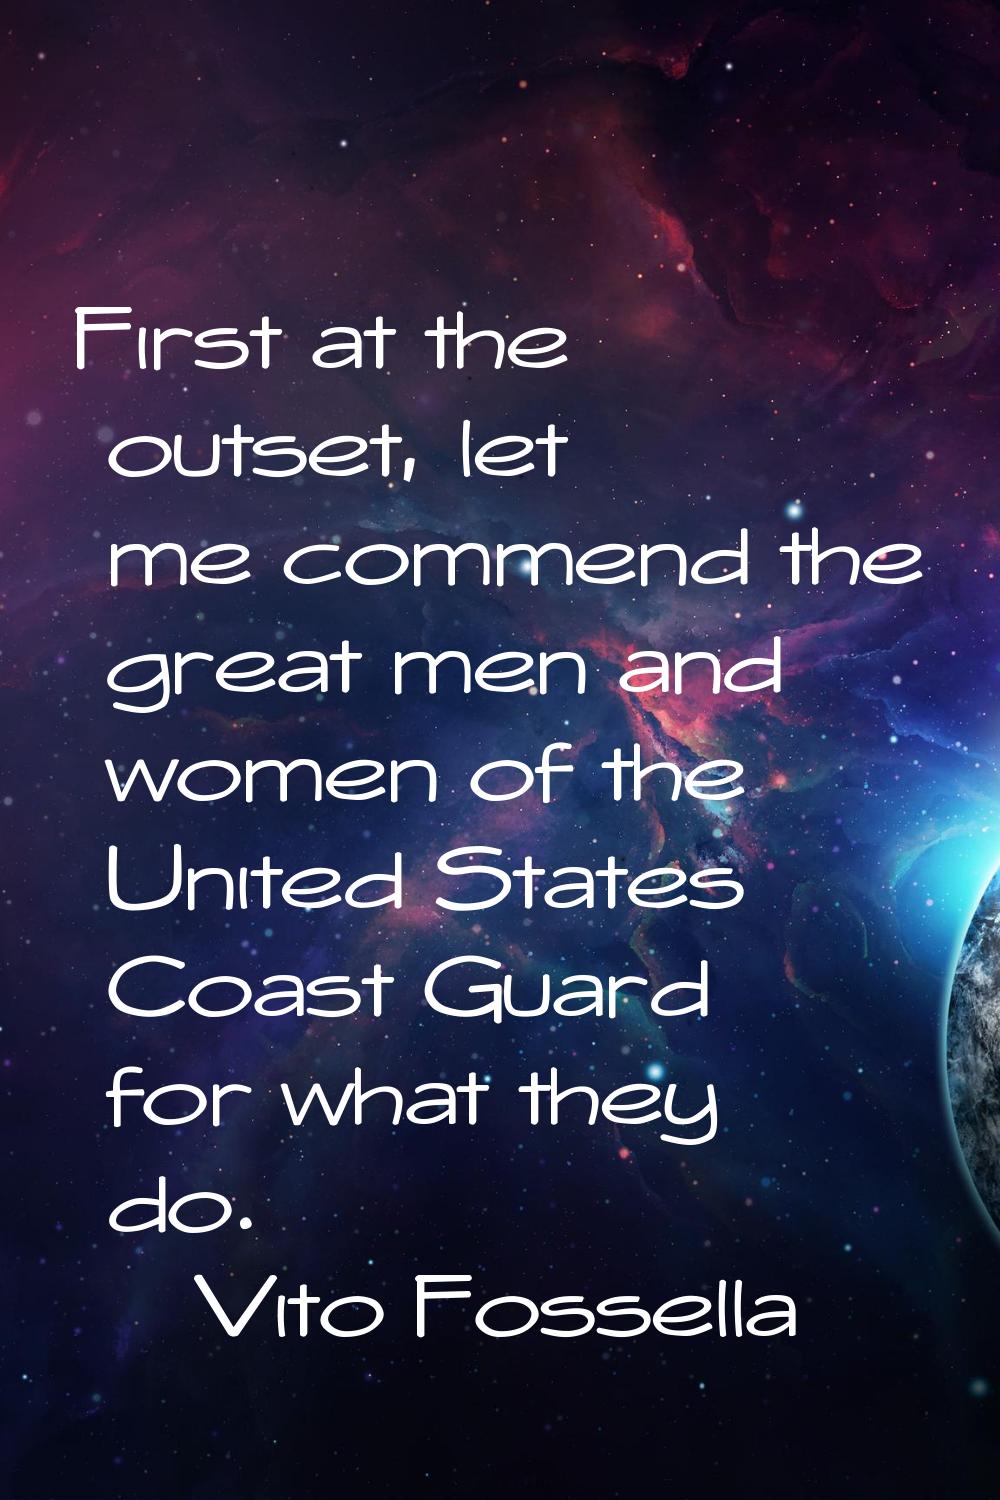 First at the outset, let me commend the great men and women of the United States Coast Guard for wh